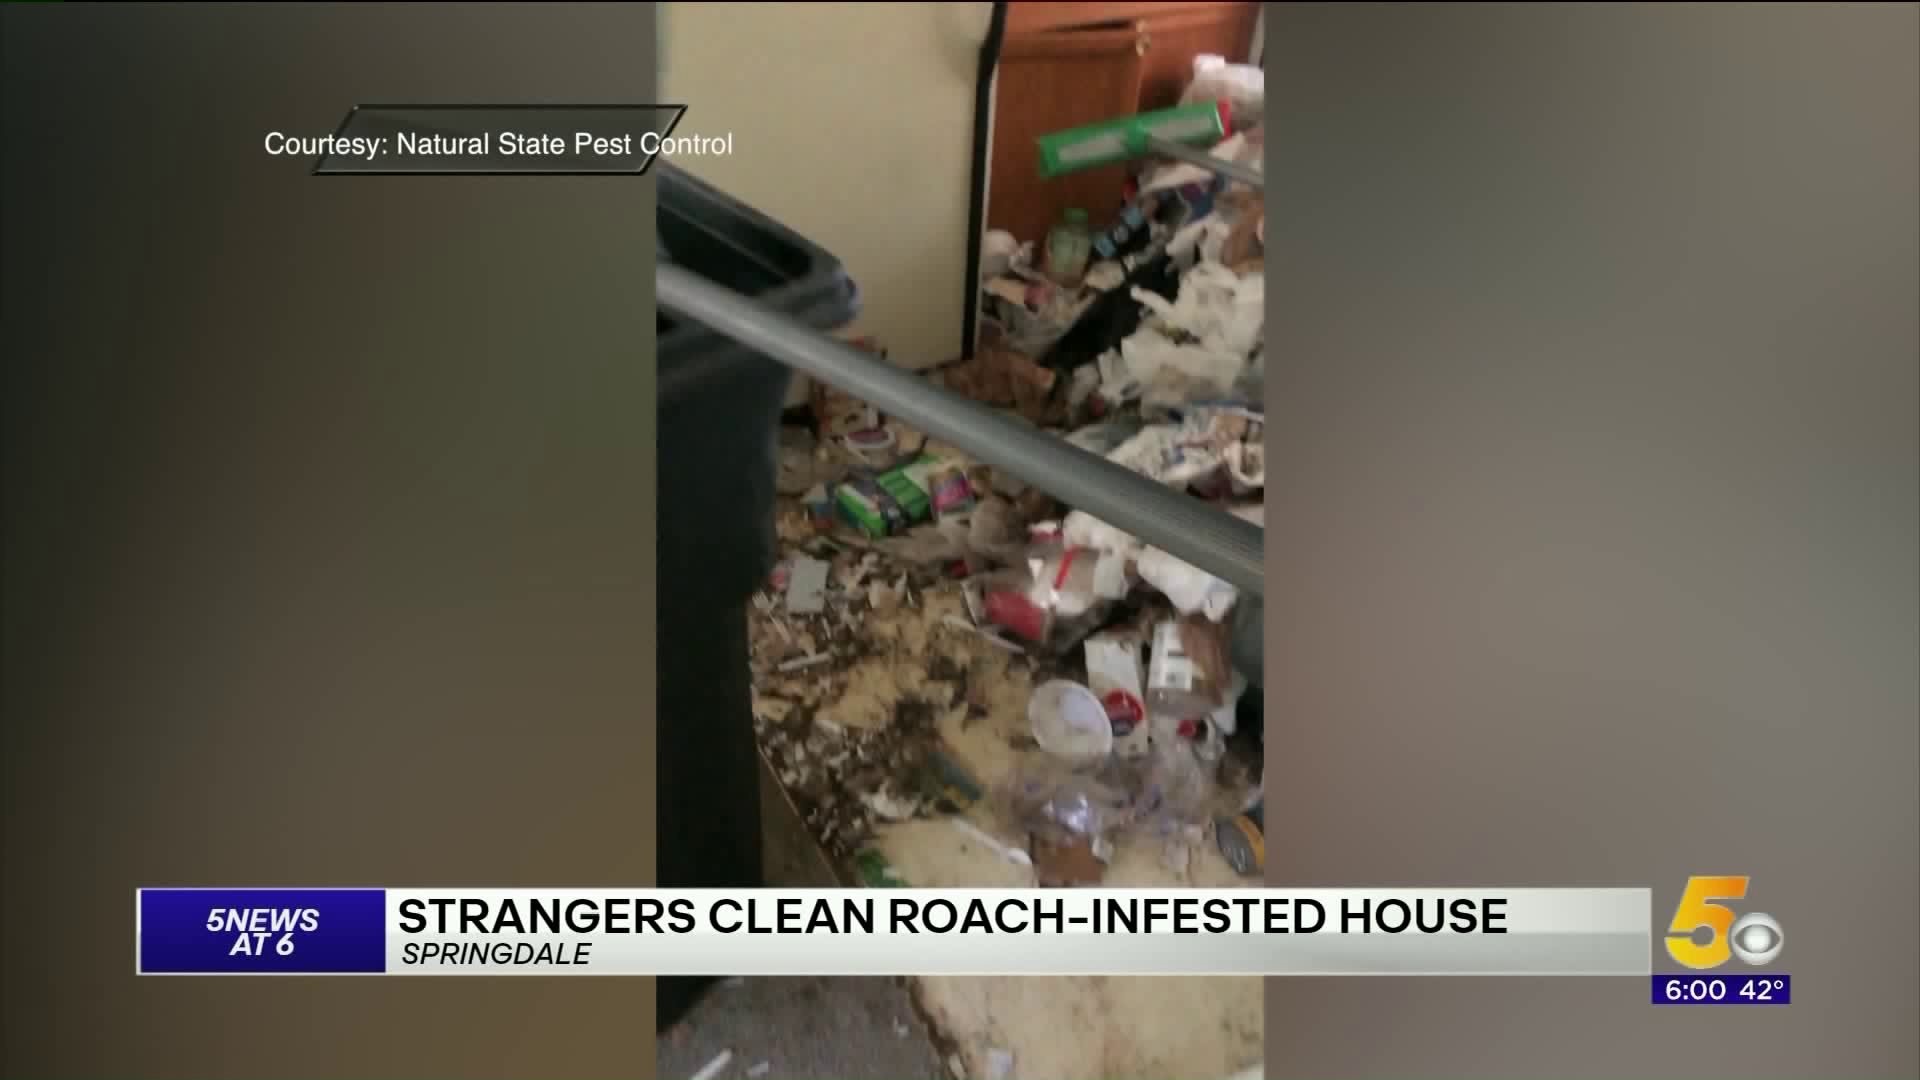 Stranger Clean Roach-Infested House in Springdale